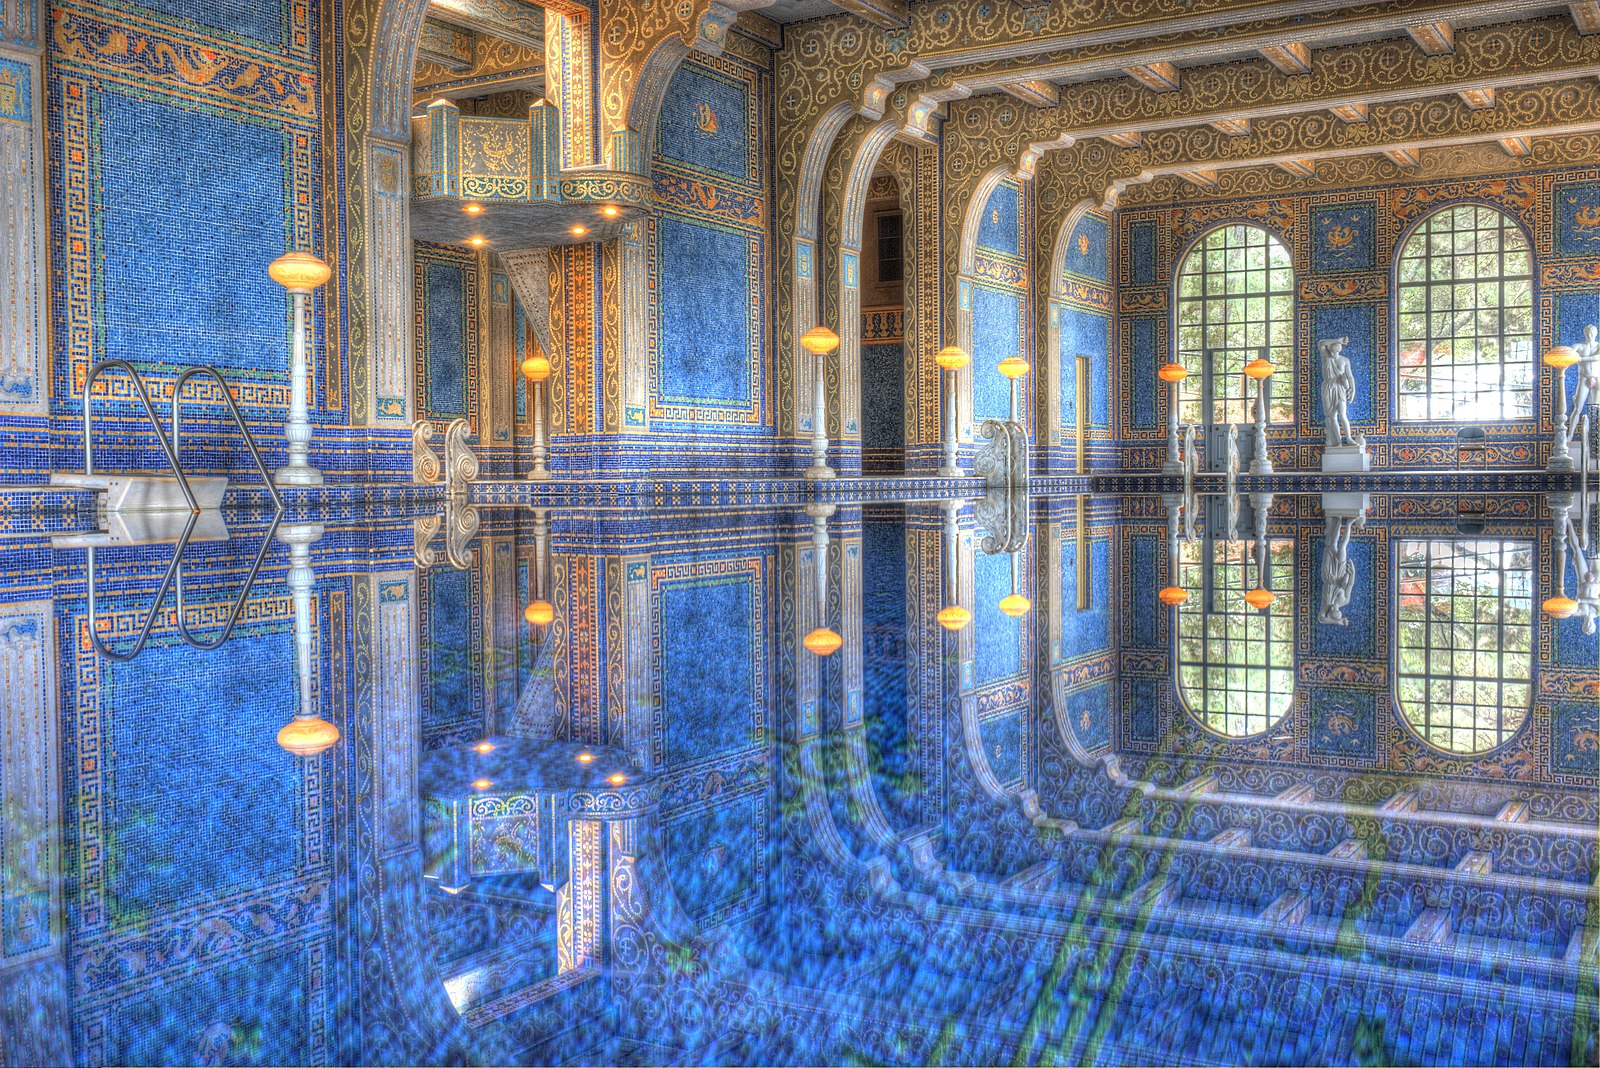 An indoor pool with blue and gold tile in ornate decorations